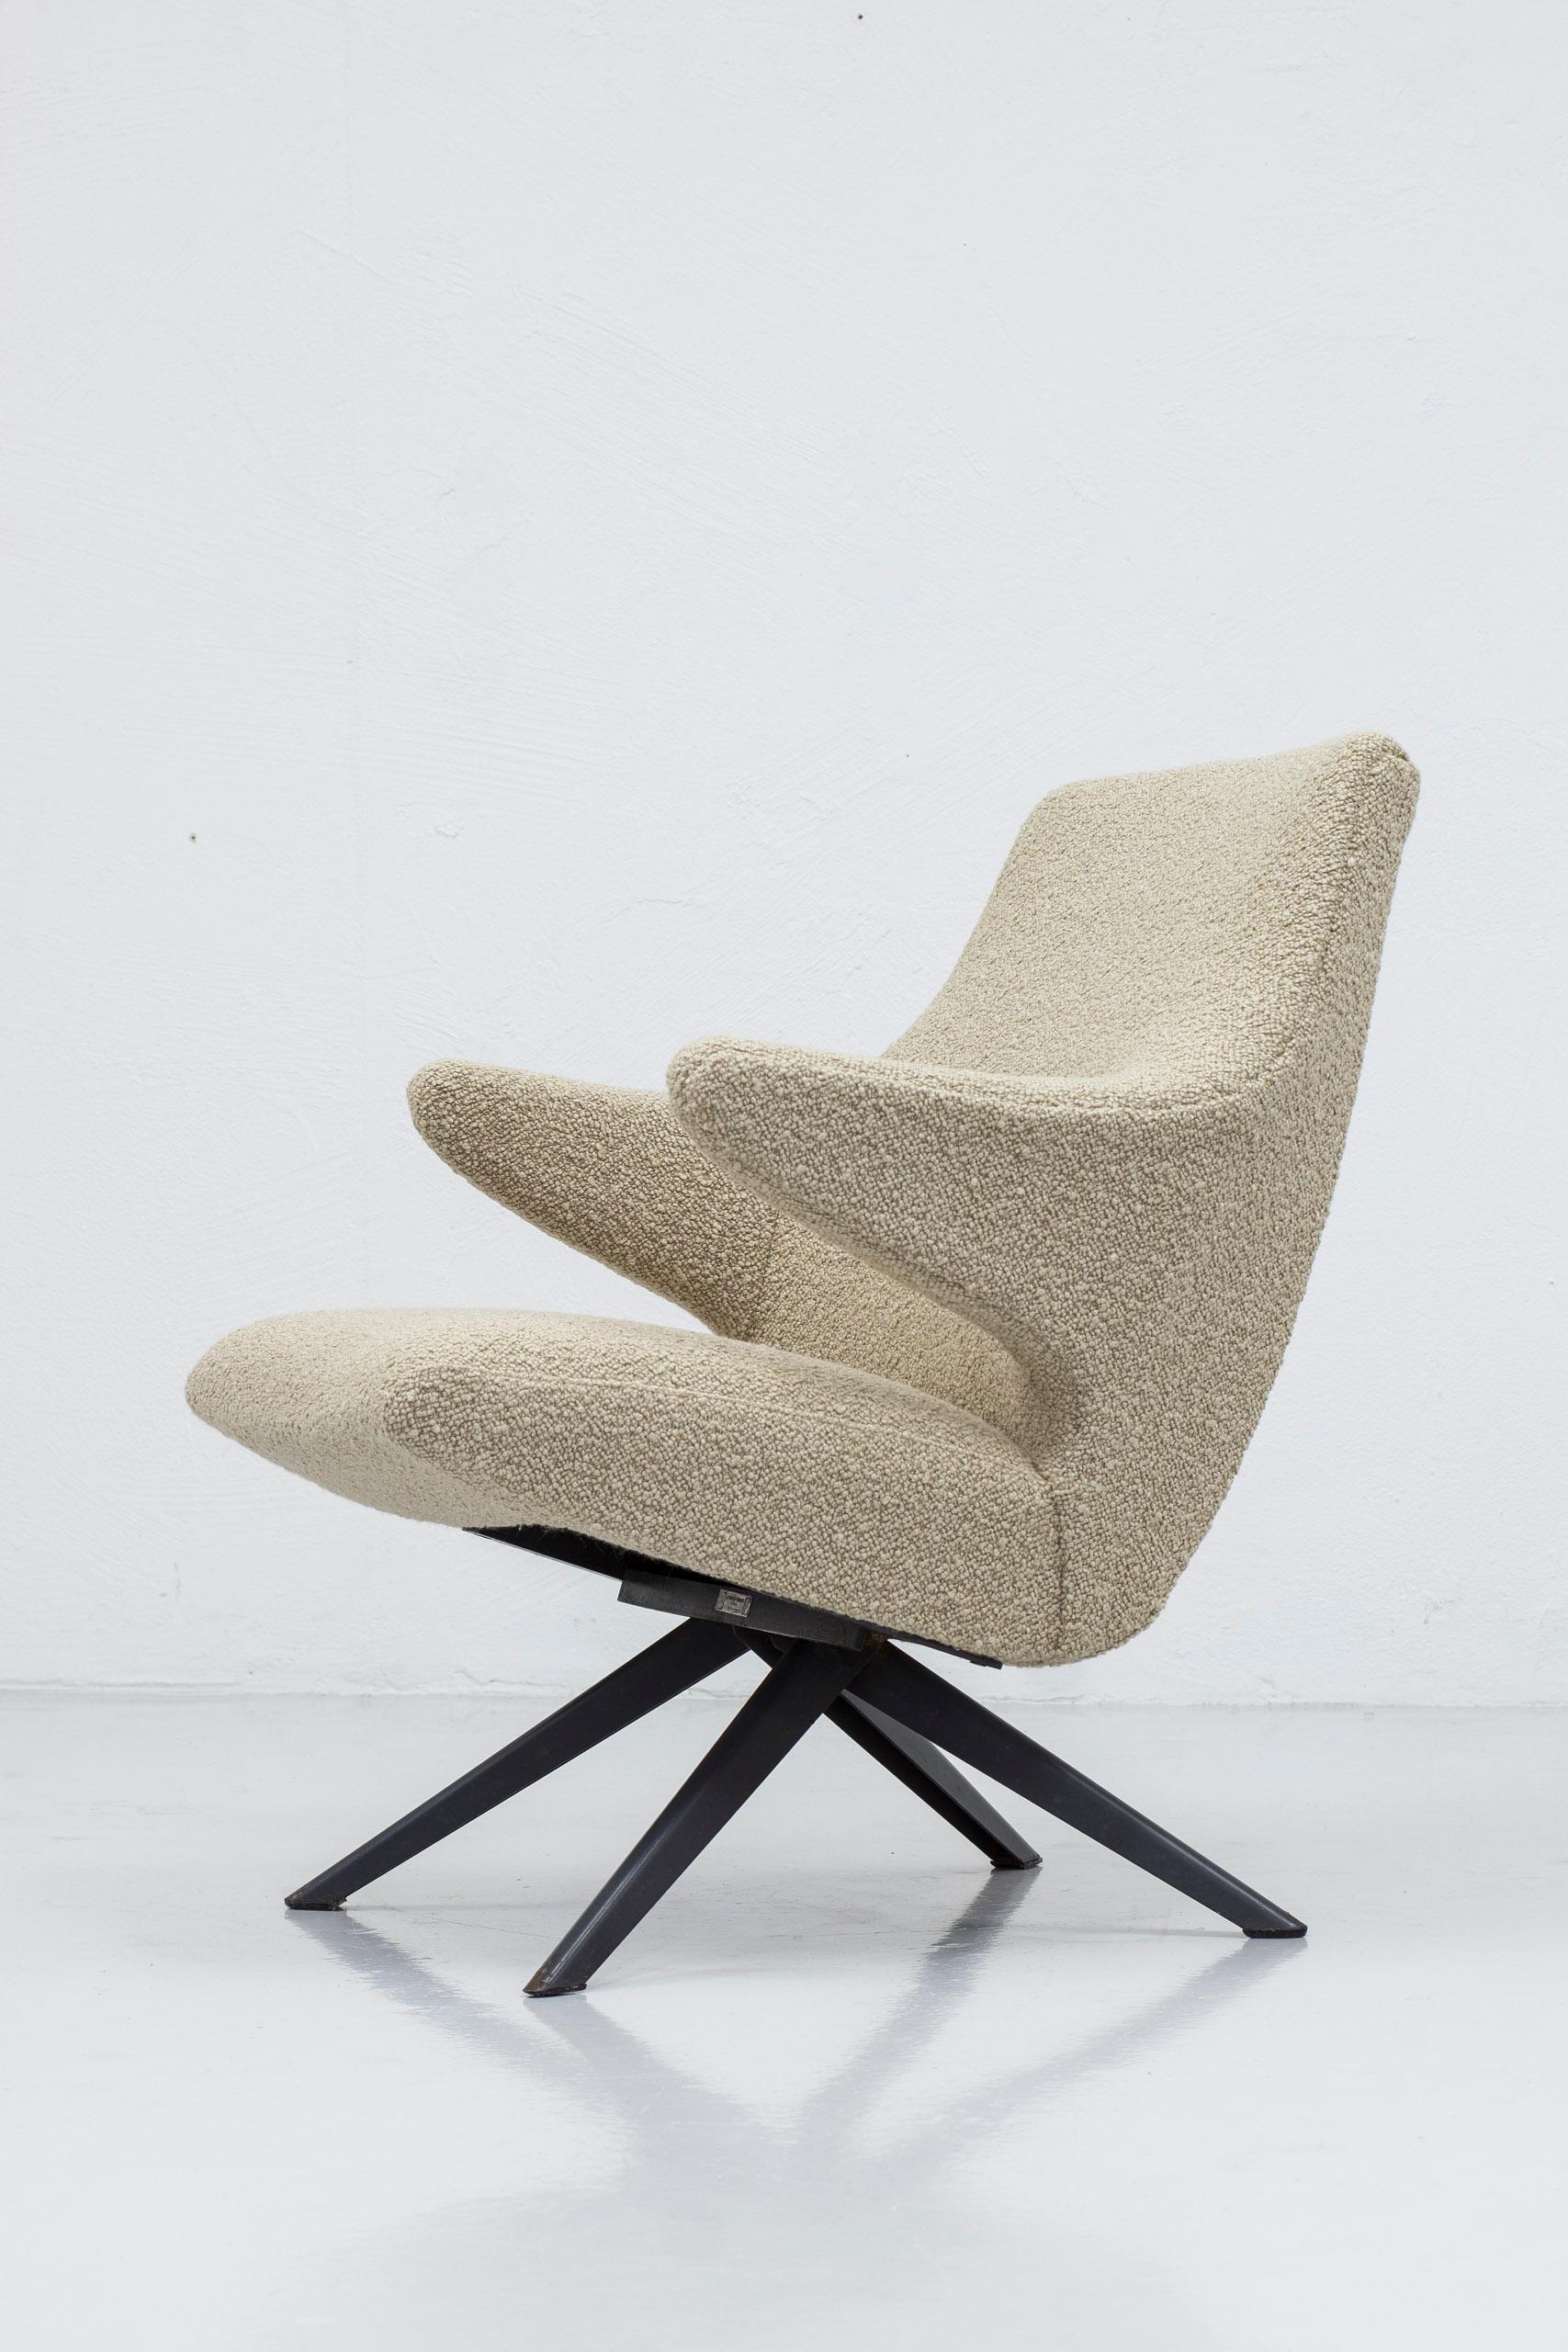 Pair of lounge chairs designed by Bengt Ruda by Nordiska Kompaniet, 1950 For Sale 2